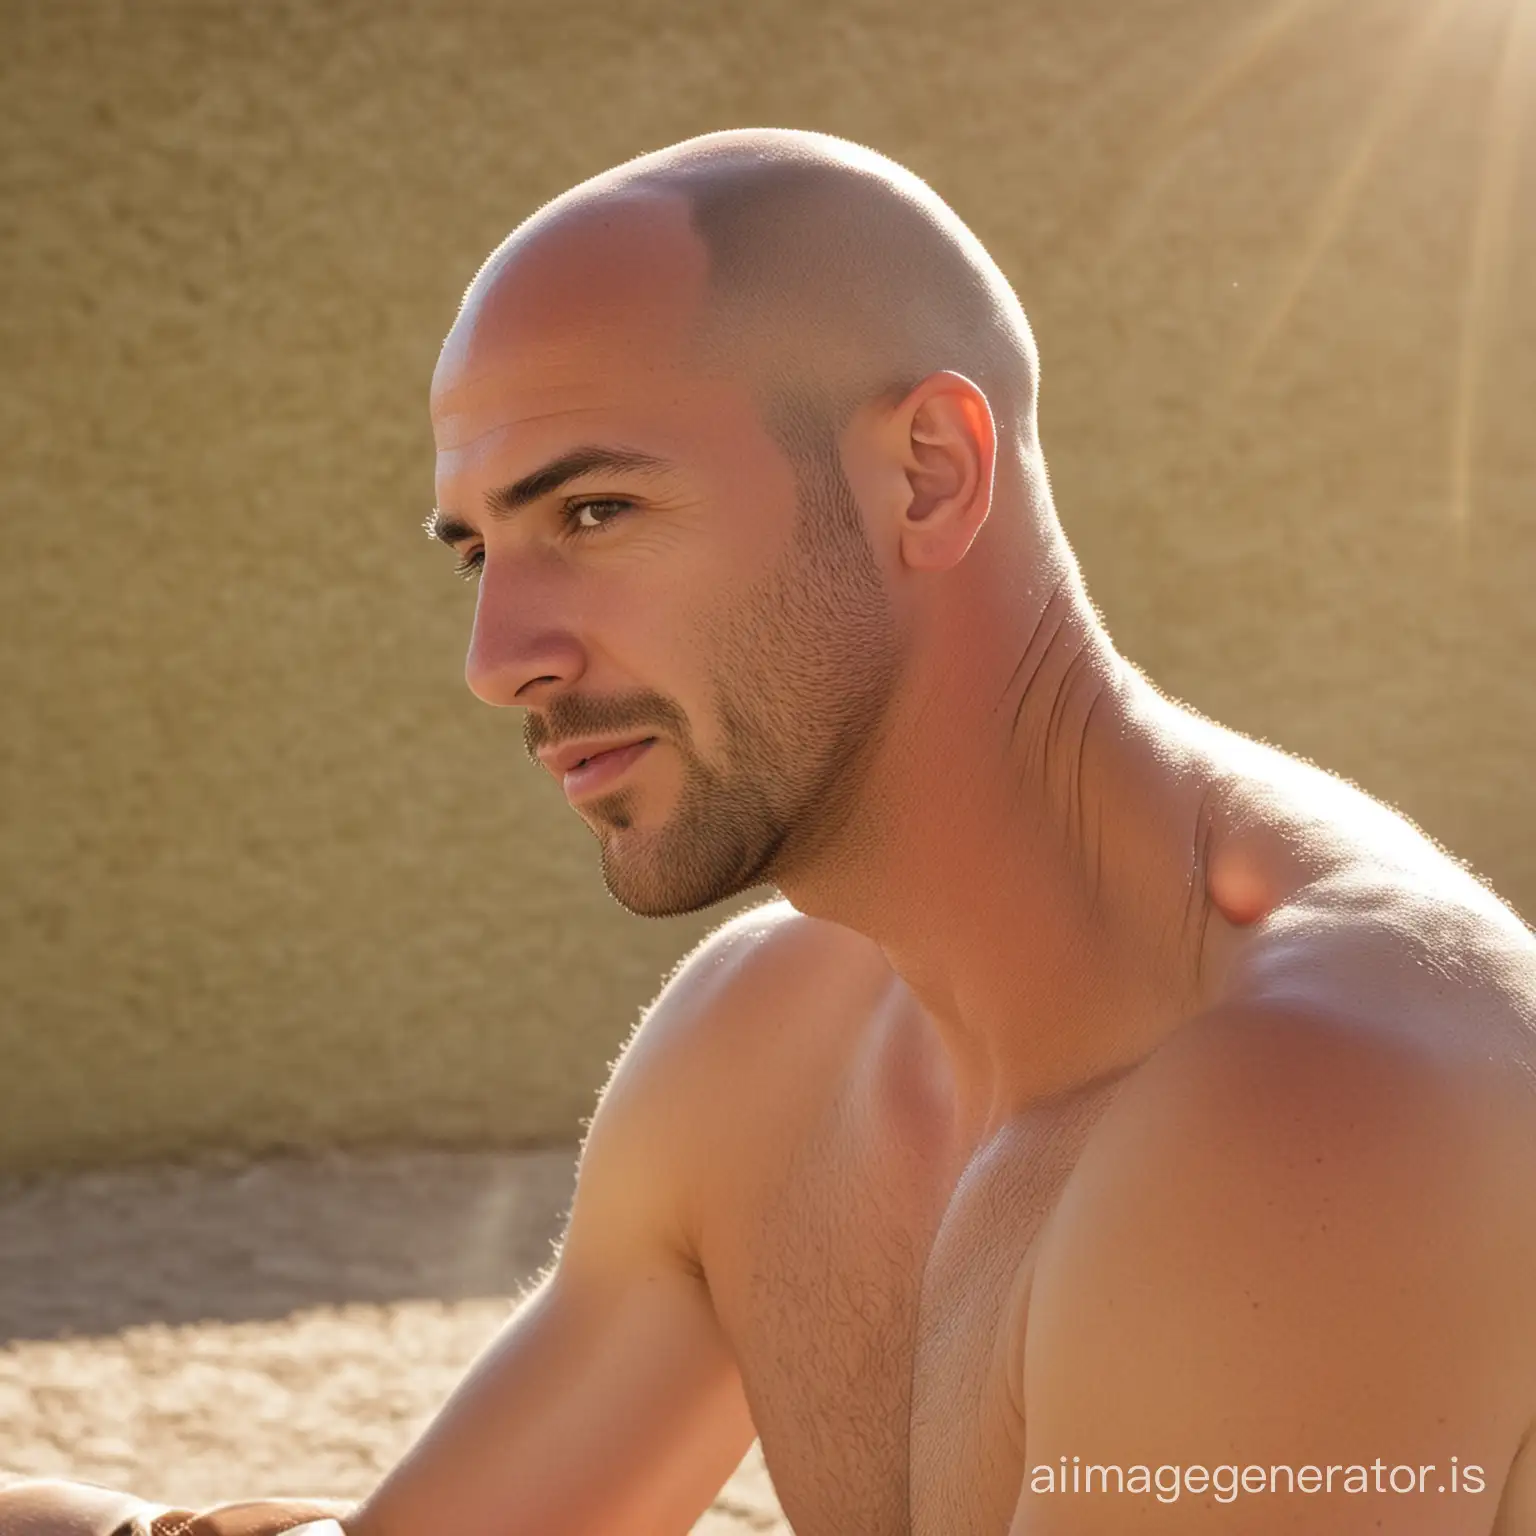 Bald man with short stubble sitting in the sunshine